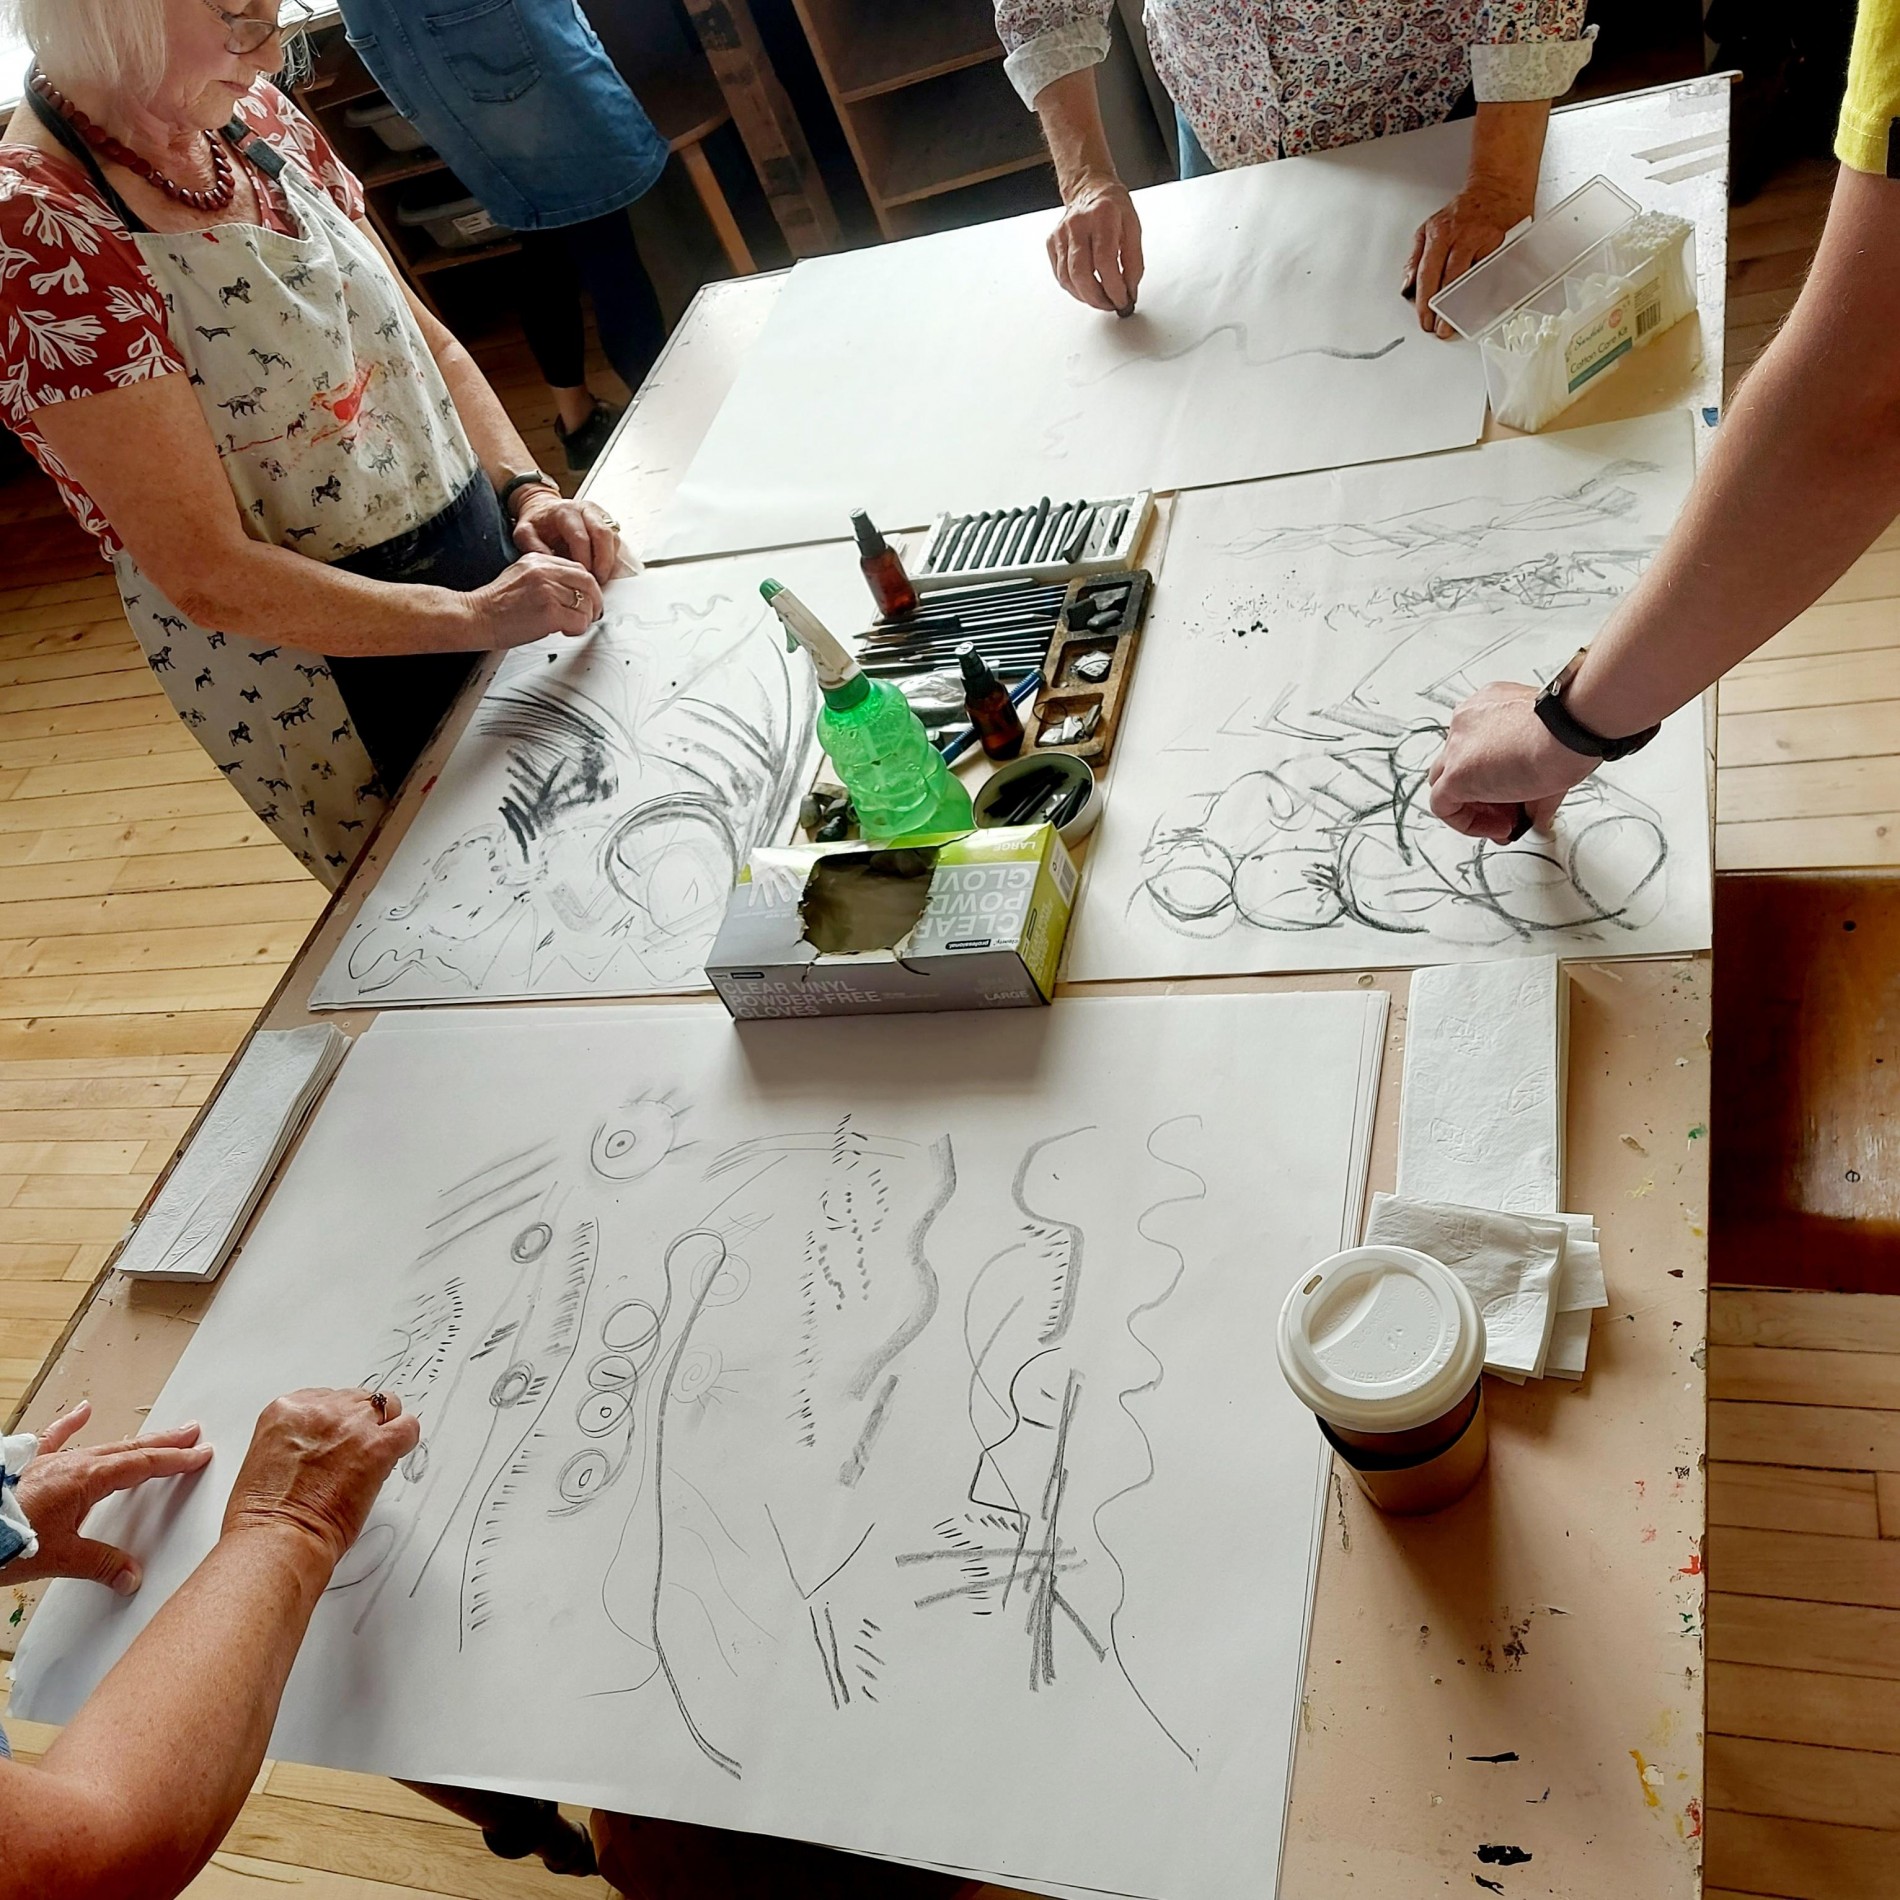 Ageing Creatively: Well Kent Places Workshops